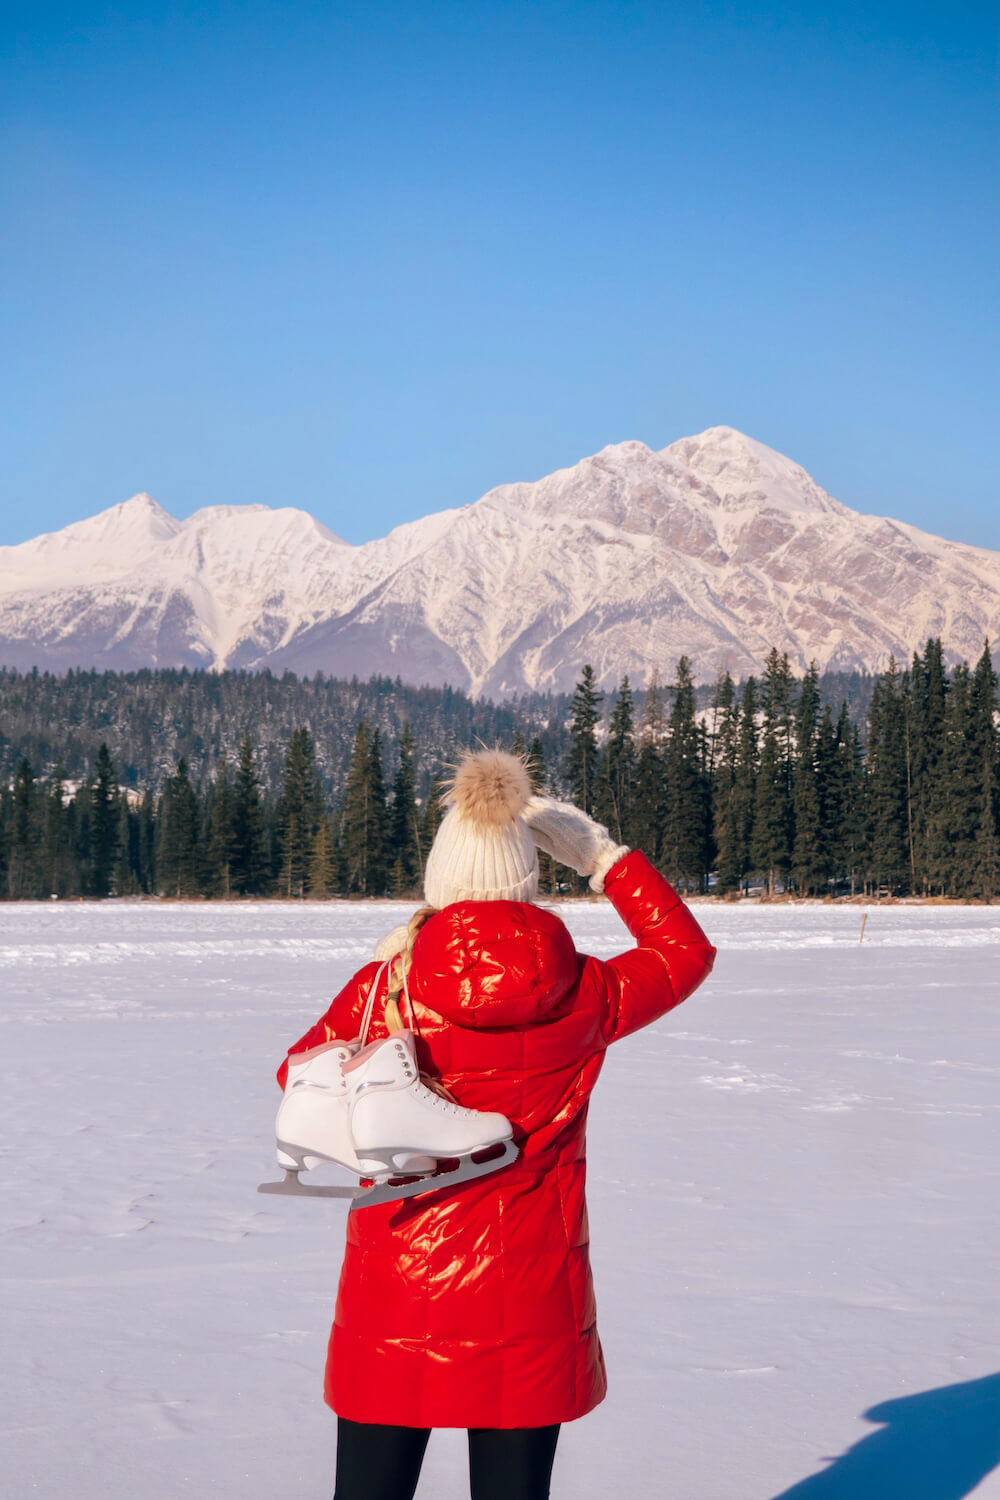 Planning a trip to Jasper National Park soon? Here's a local's guide to some of the best things to do in Jasper. From hikes and trails to adventure sports, family friendly excursions, dining experiences and more. You won't want to miss this guide of the best things to do and places to see in Jasper. Pictured here: Skating at the Fairmont Jasper Park Lodge